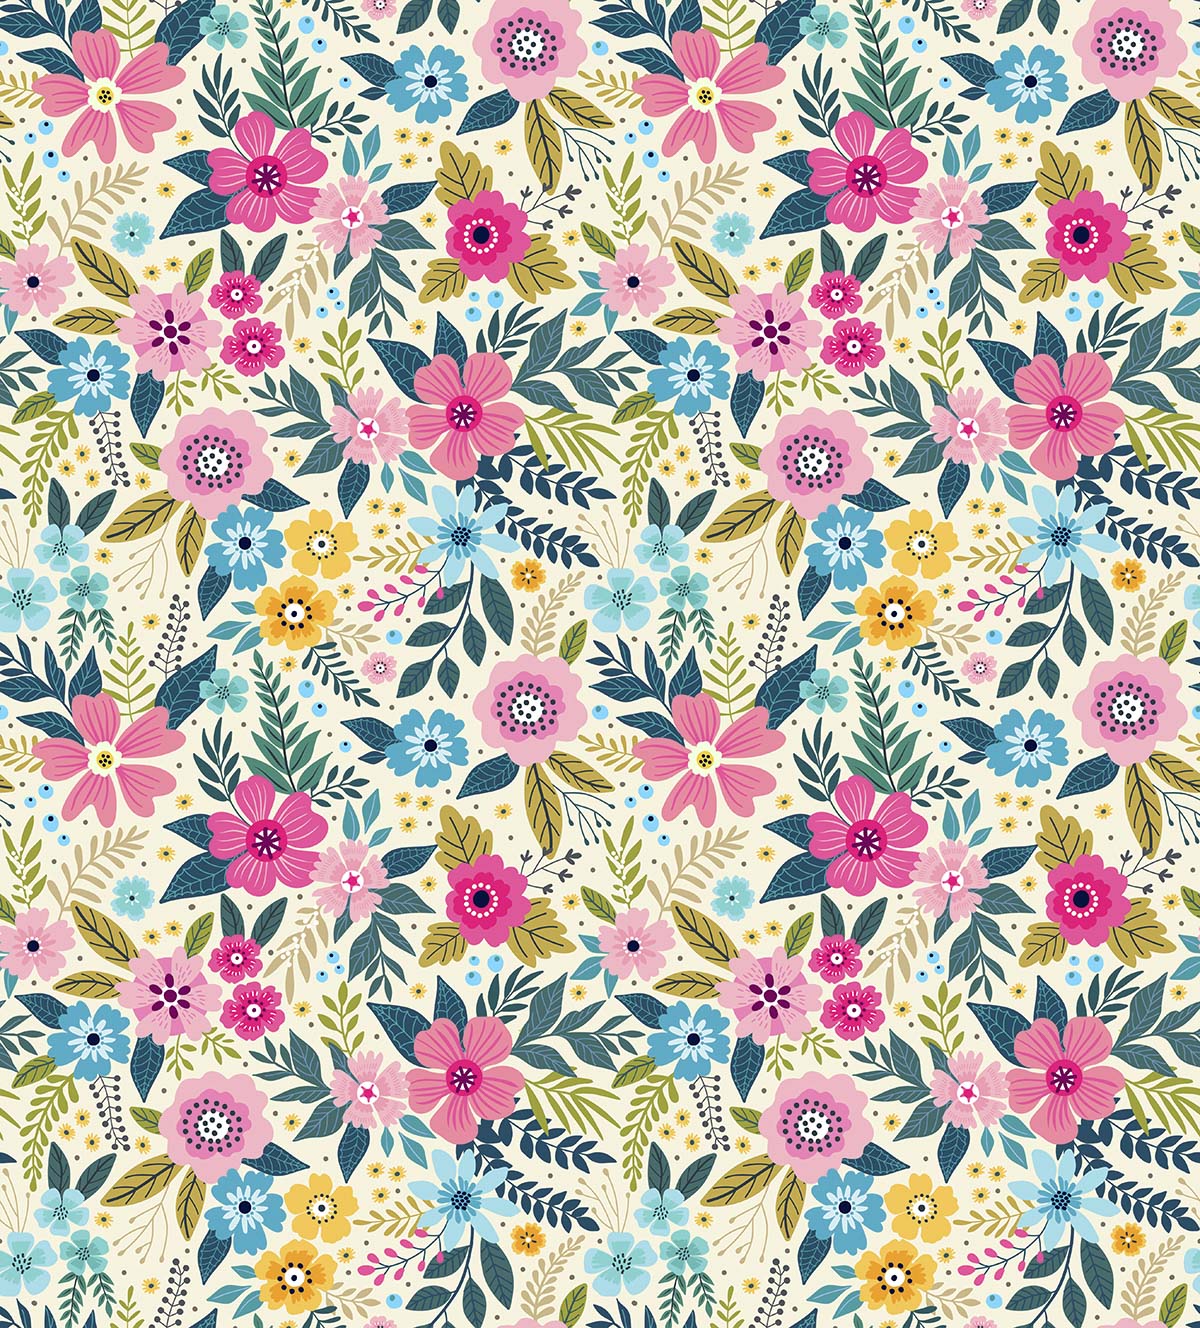 A pattern of colorful flowers